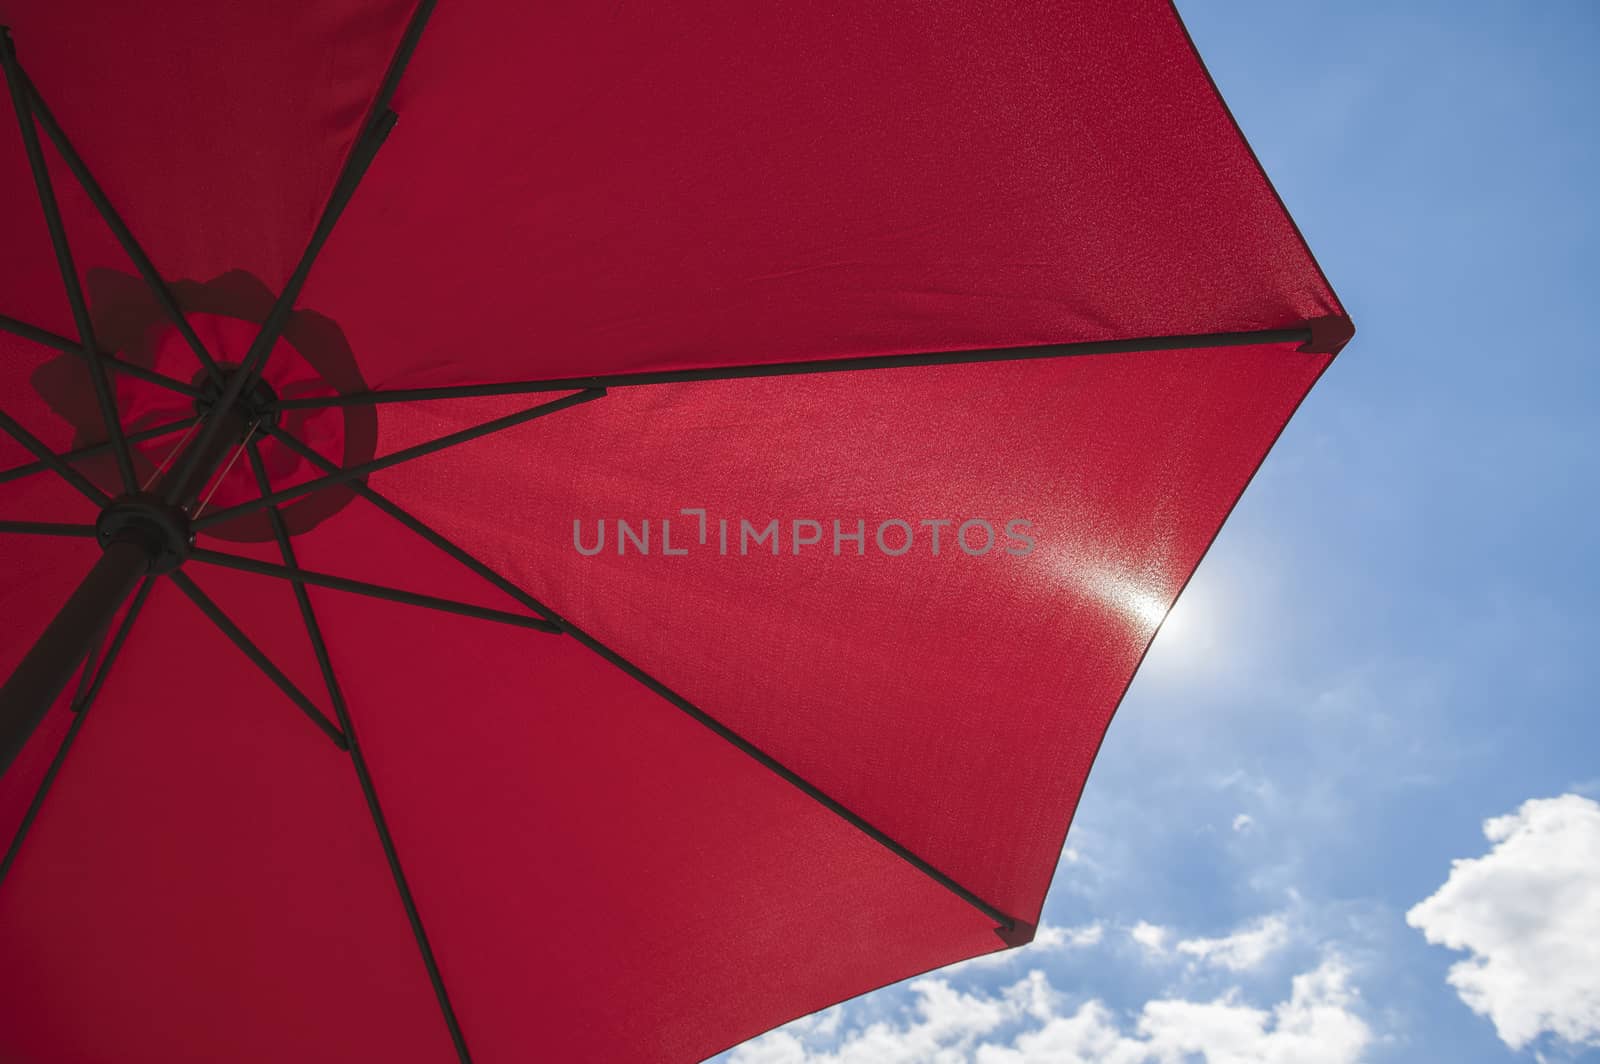 Red beach parasol against a blue sky
 by Tofotografie